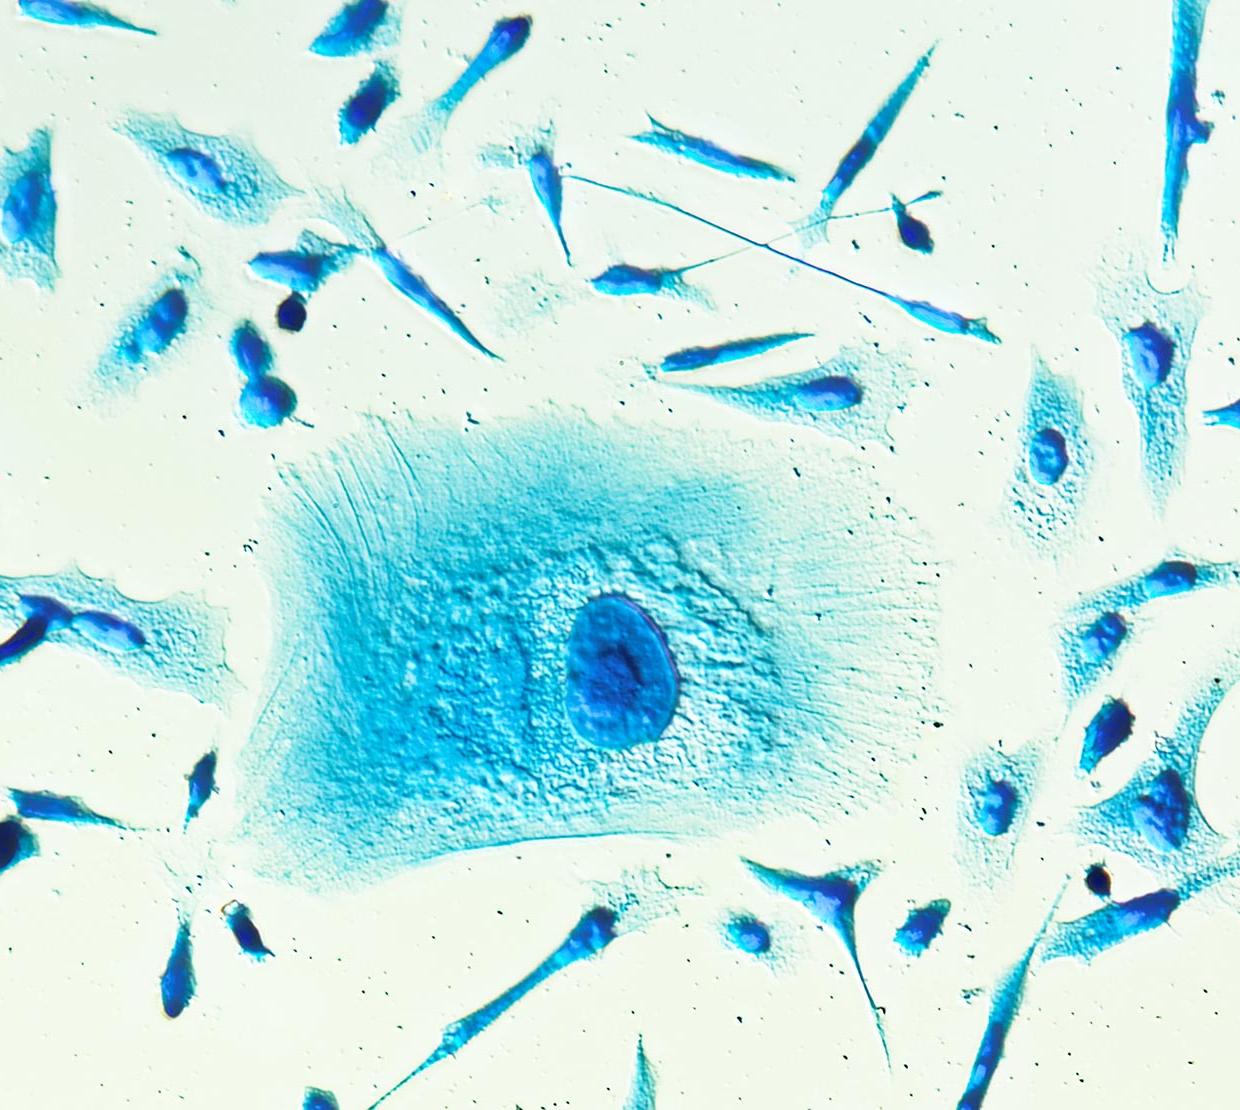 microscopic image of blue PC-3 cancer cells 